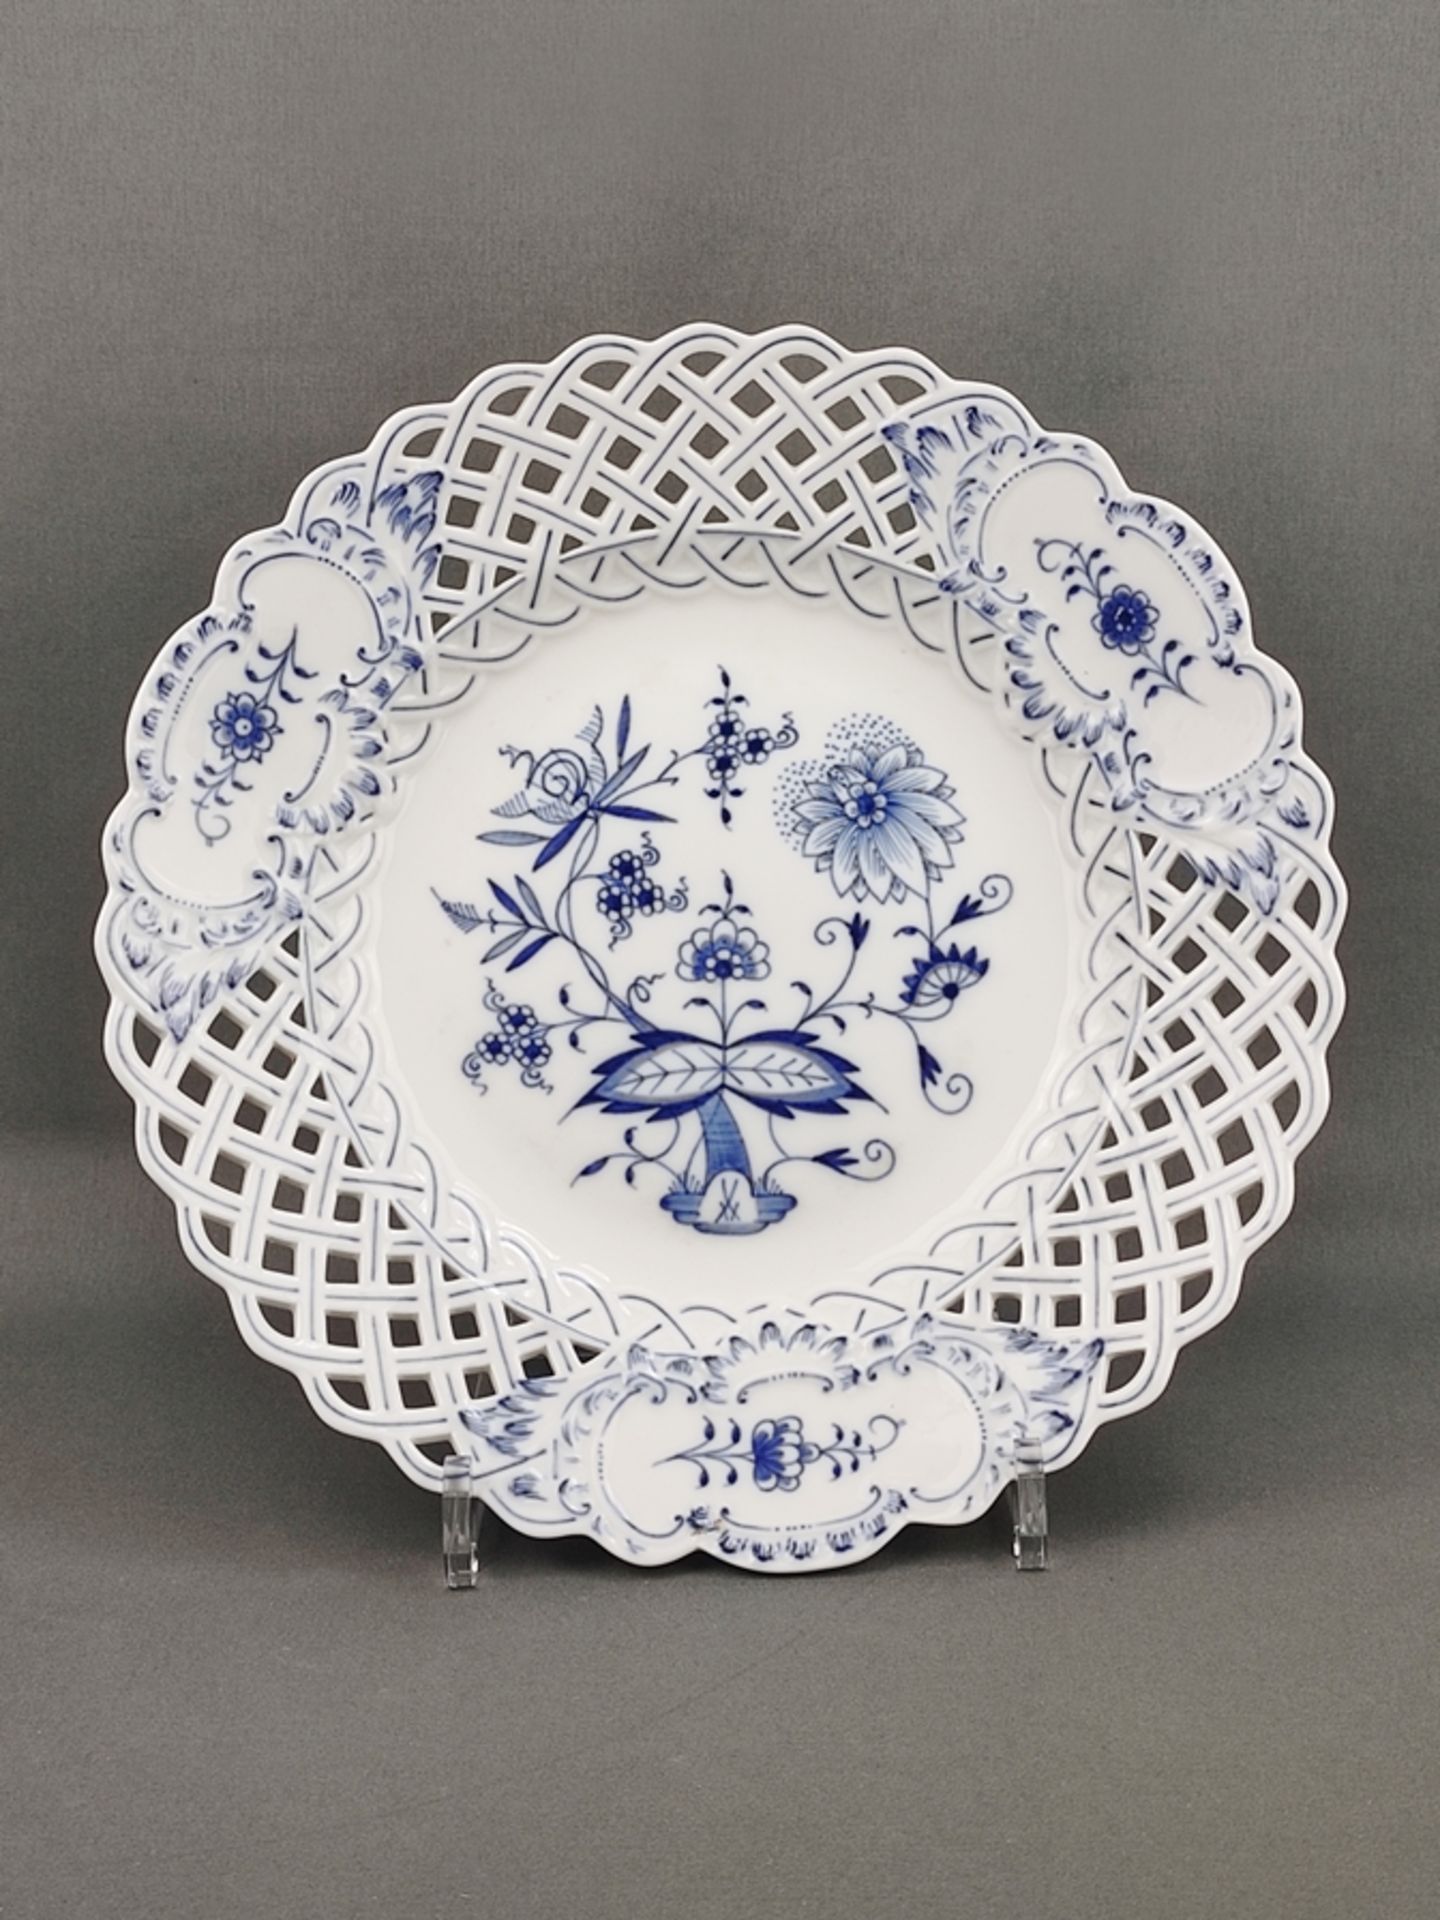 Breakthrough dish, Meissen, 1st choice, blue onion pattern, flag with rocaille cartouches and openw